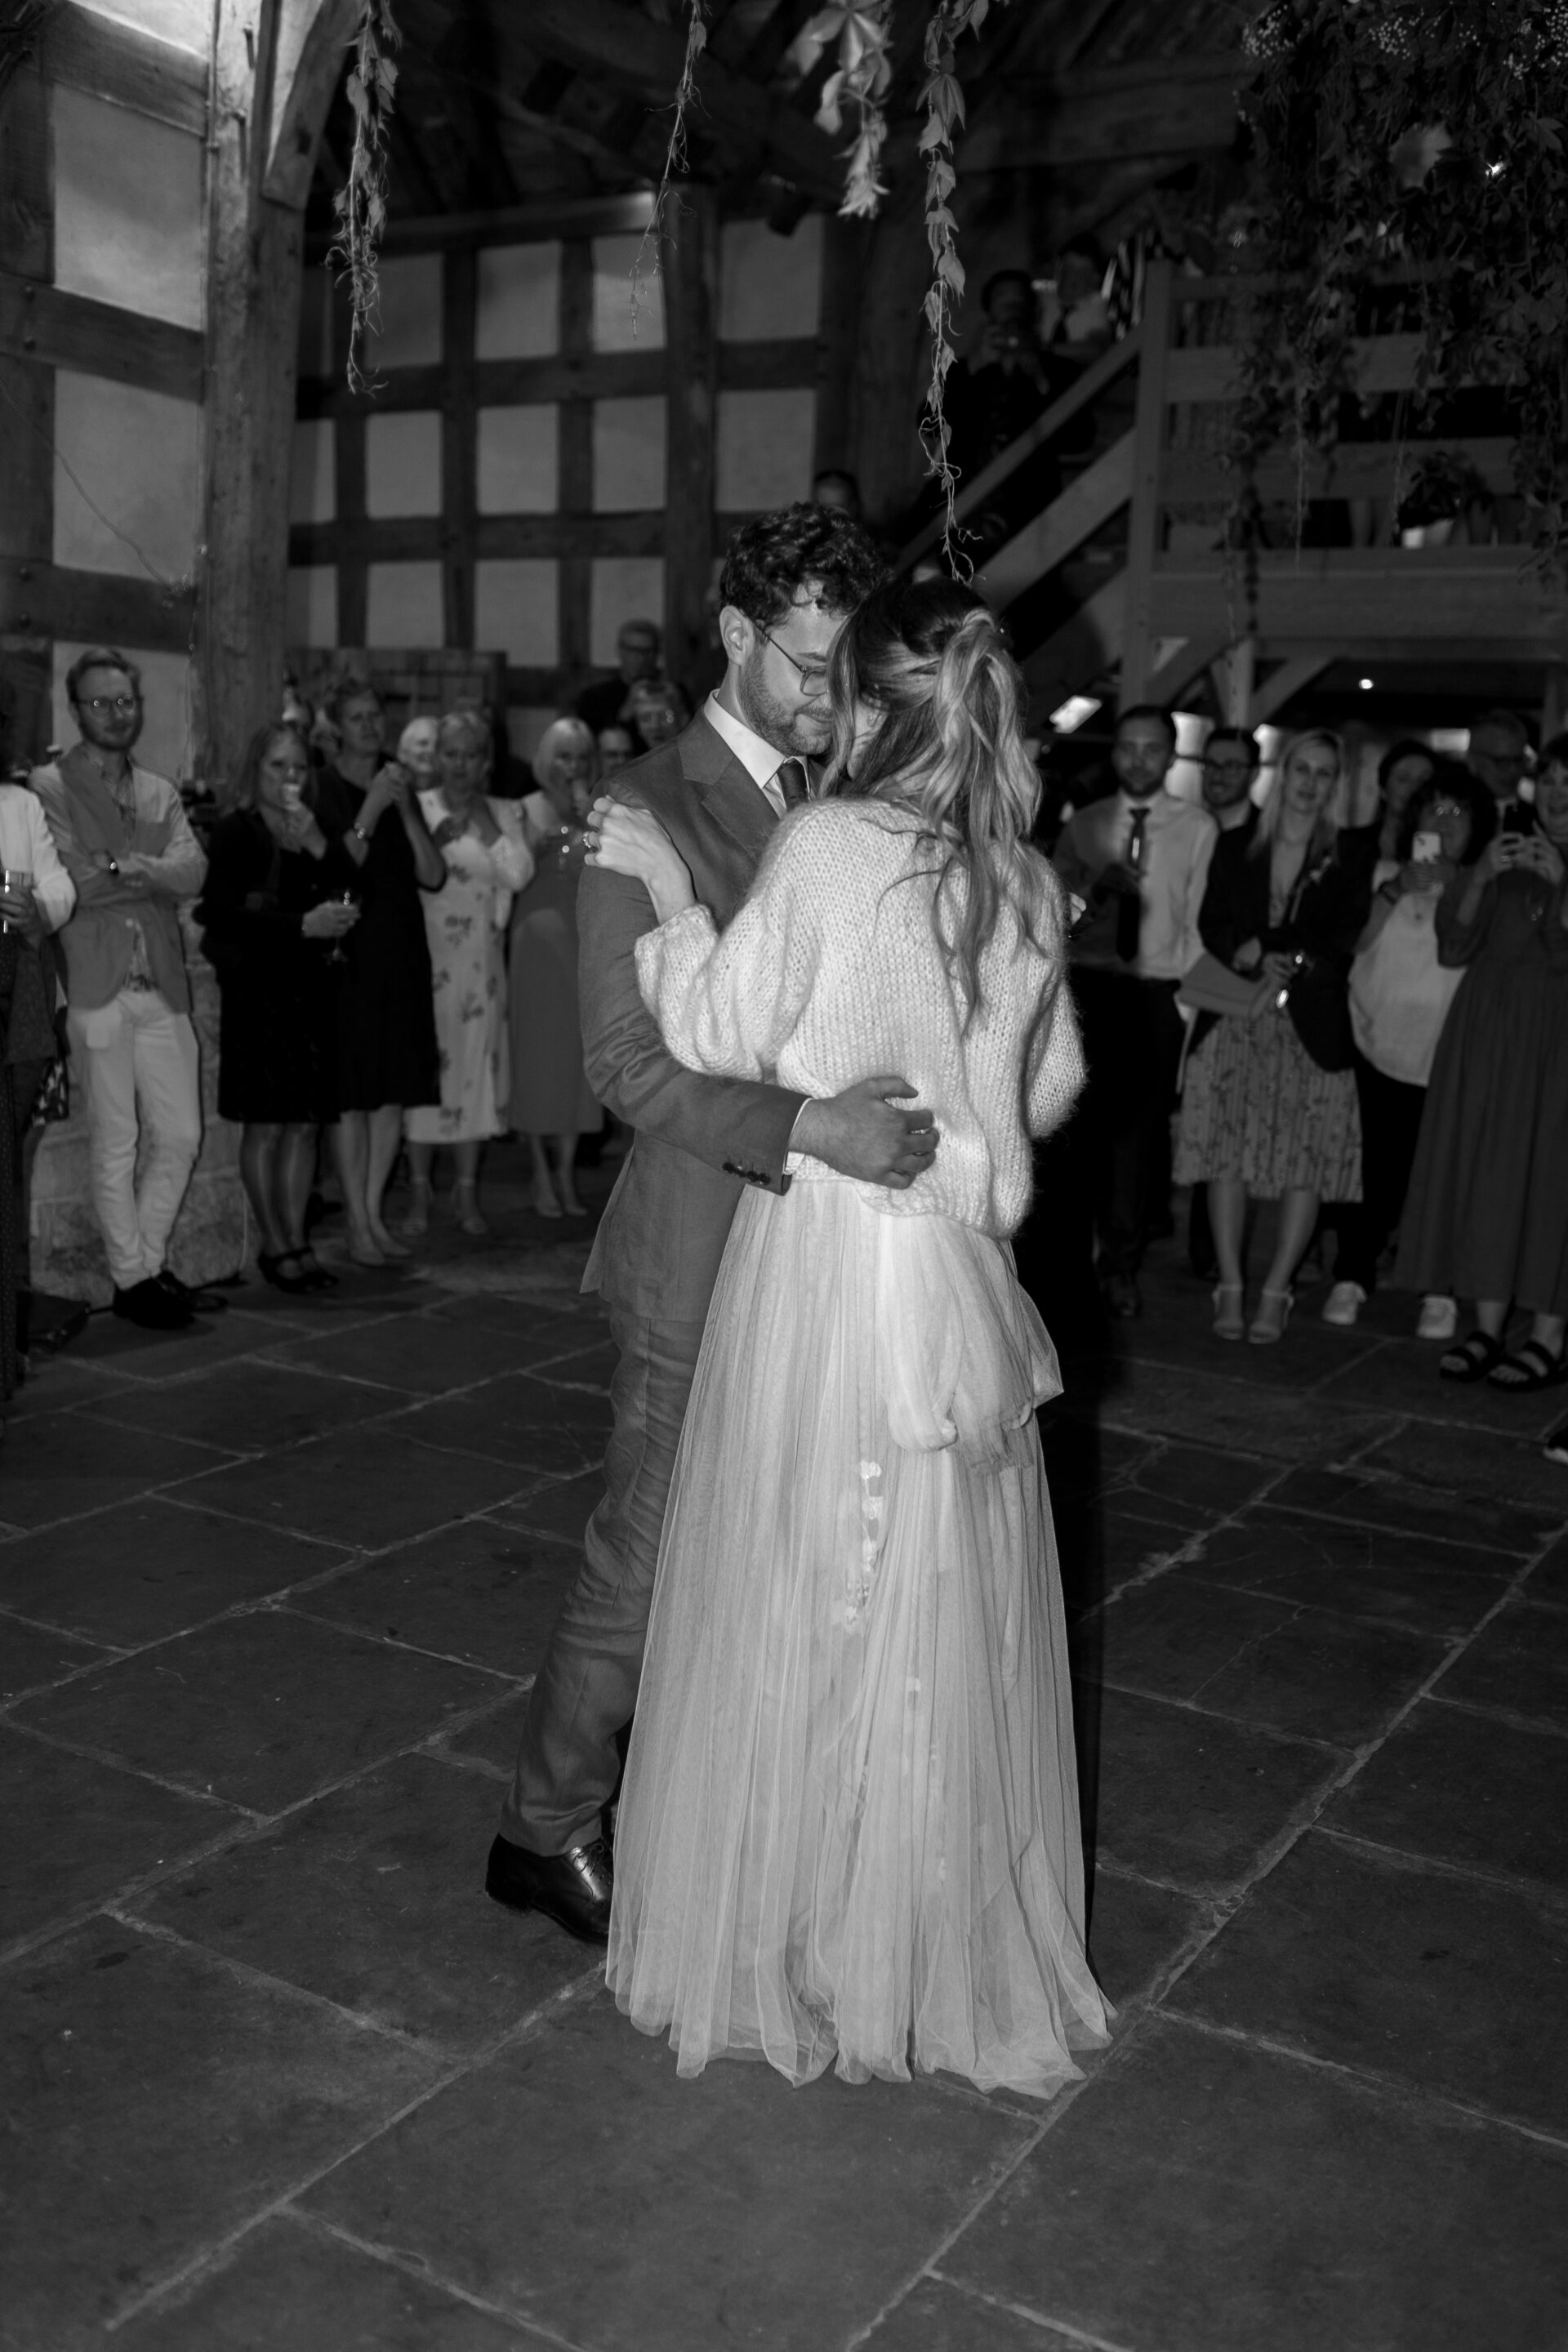 The bride and groom share their first dance at the Wool Barn, Gloucestershire wedding venue